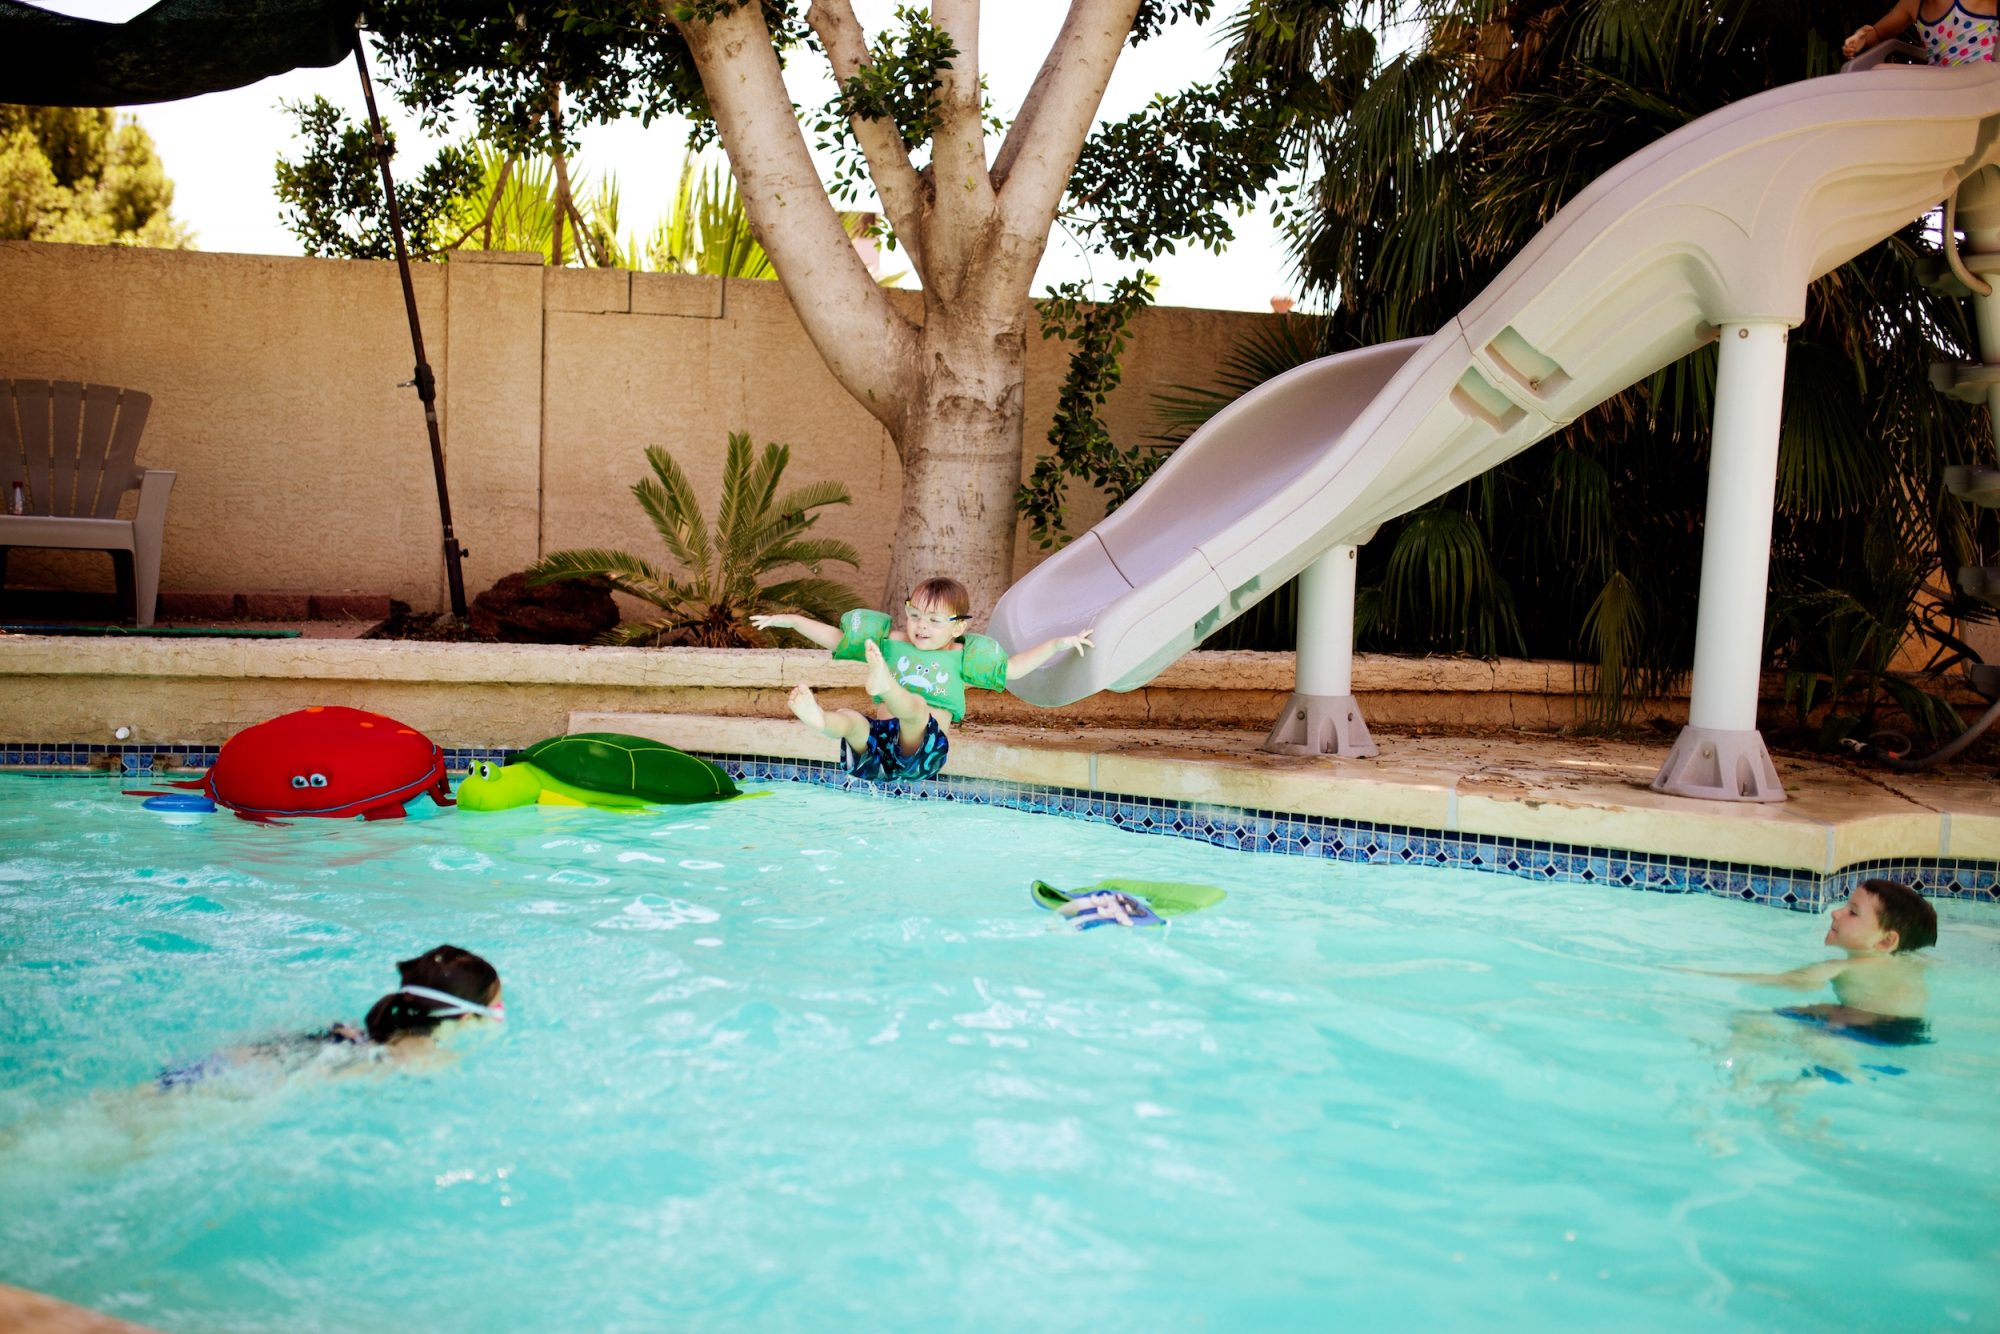 Tips to avoid children drowning at home: A major concern during hot months